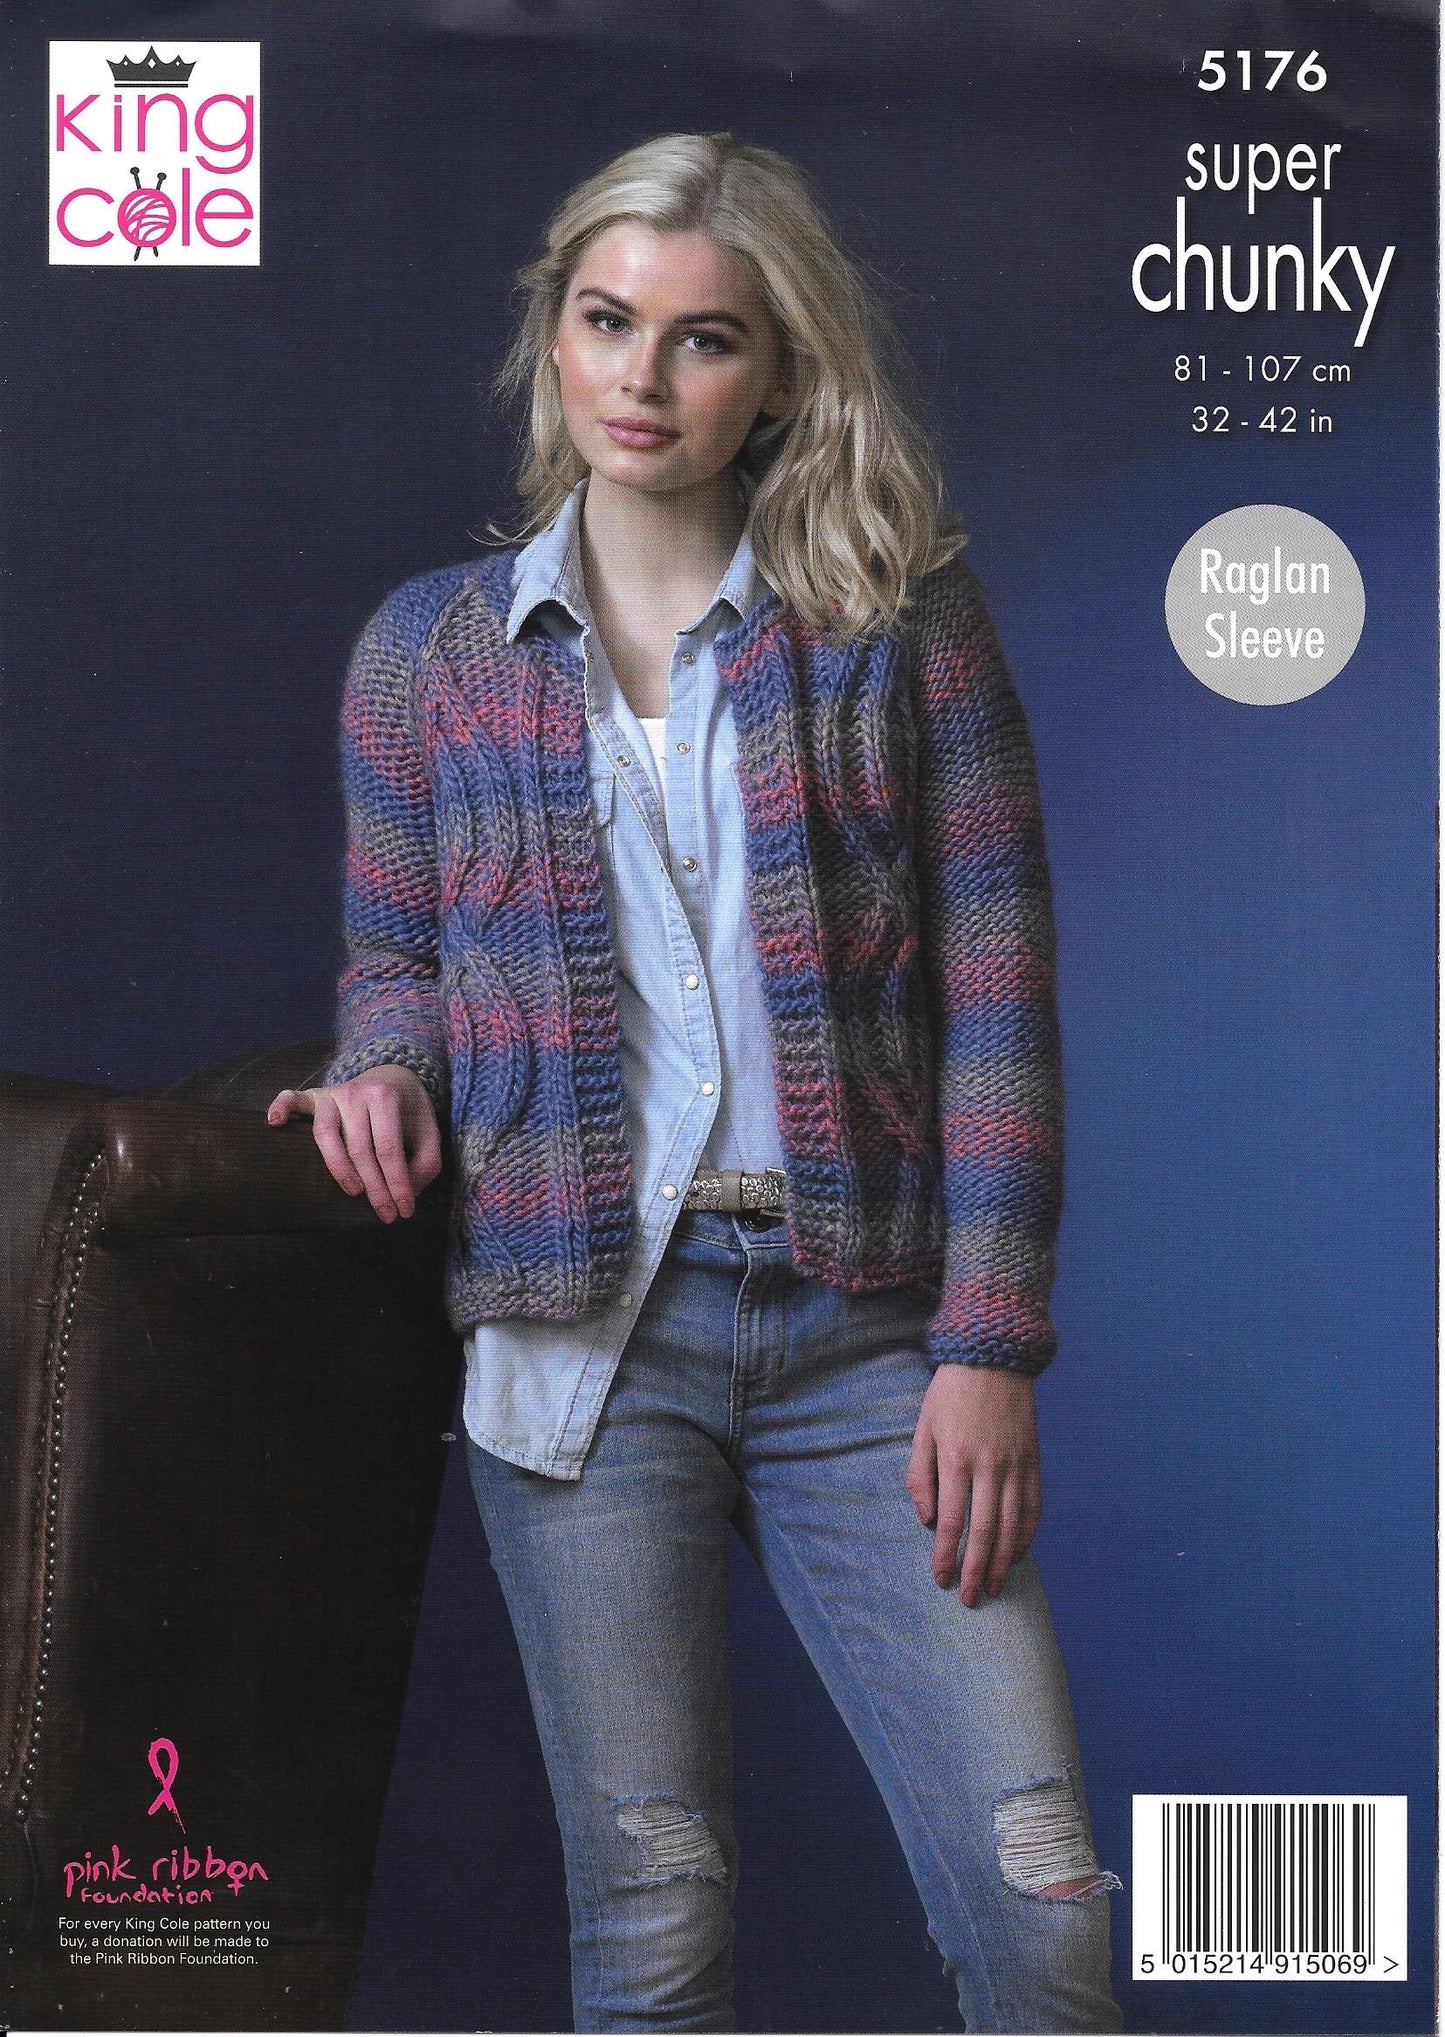 5176 King Cole super chunky ladies short and long jacket knitting pattern